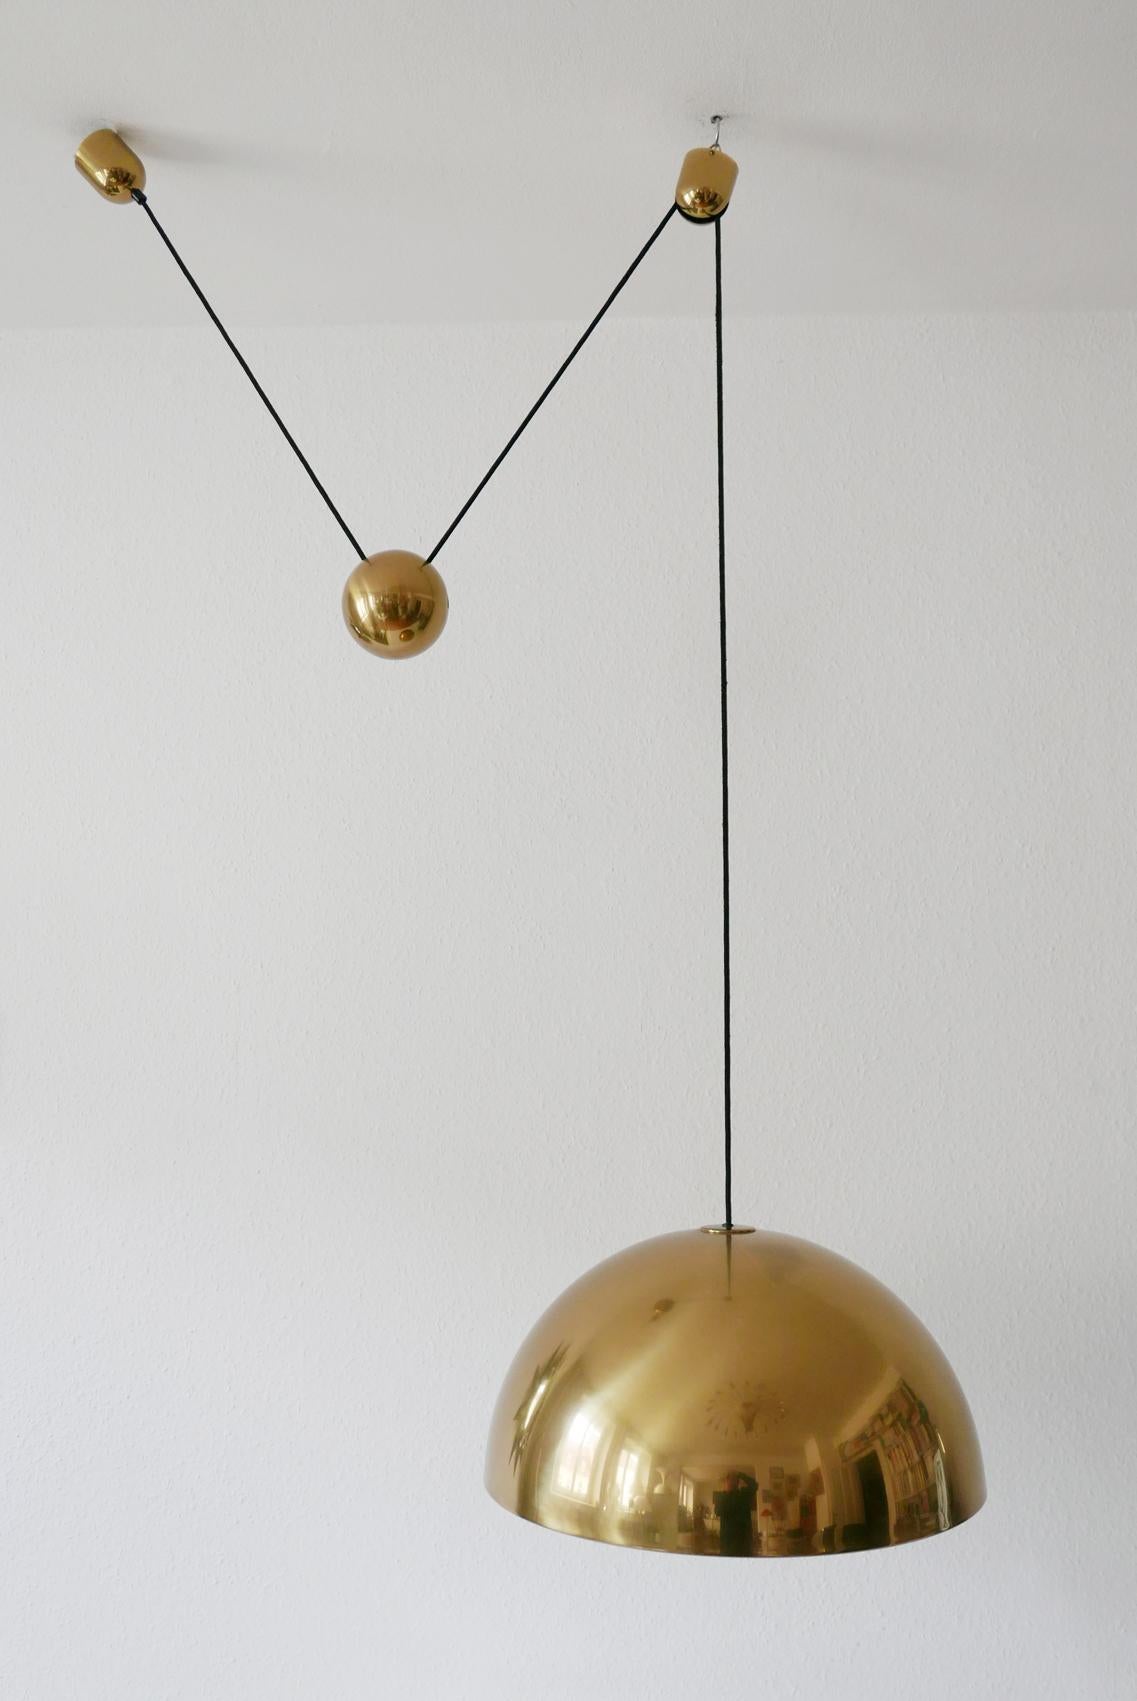 Exceptional Solan Counter Balance Pendant Lamp by Florian Schulz, 1980s, Germany For Sale 5